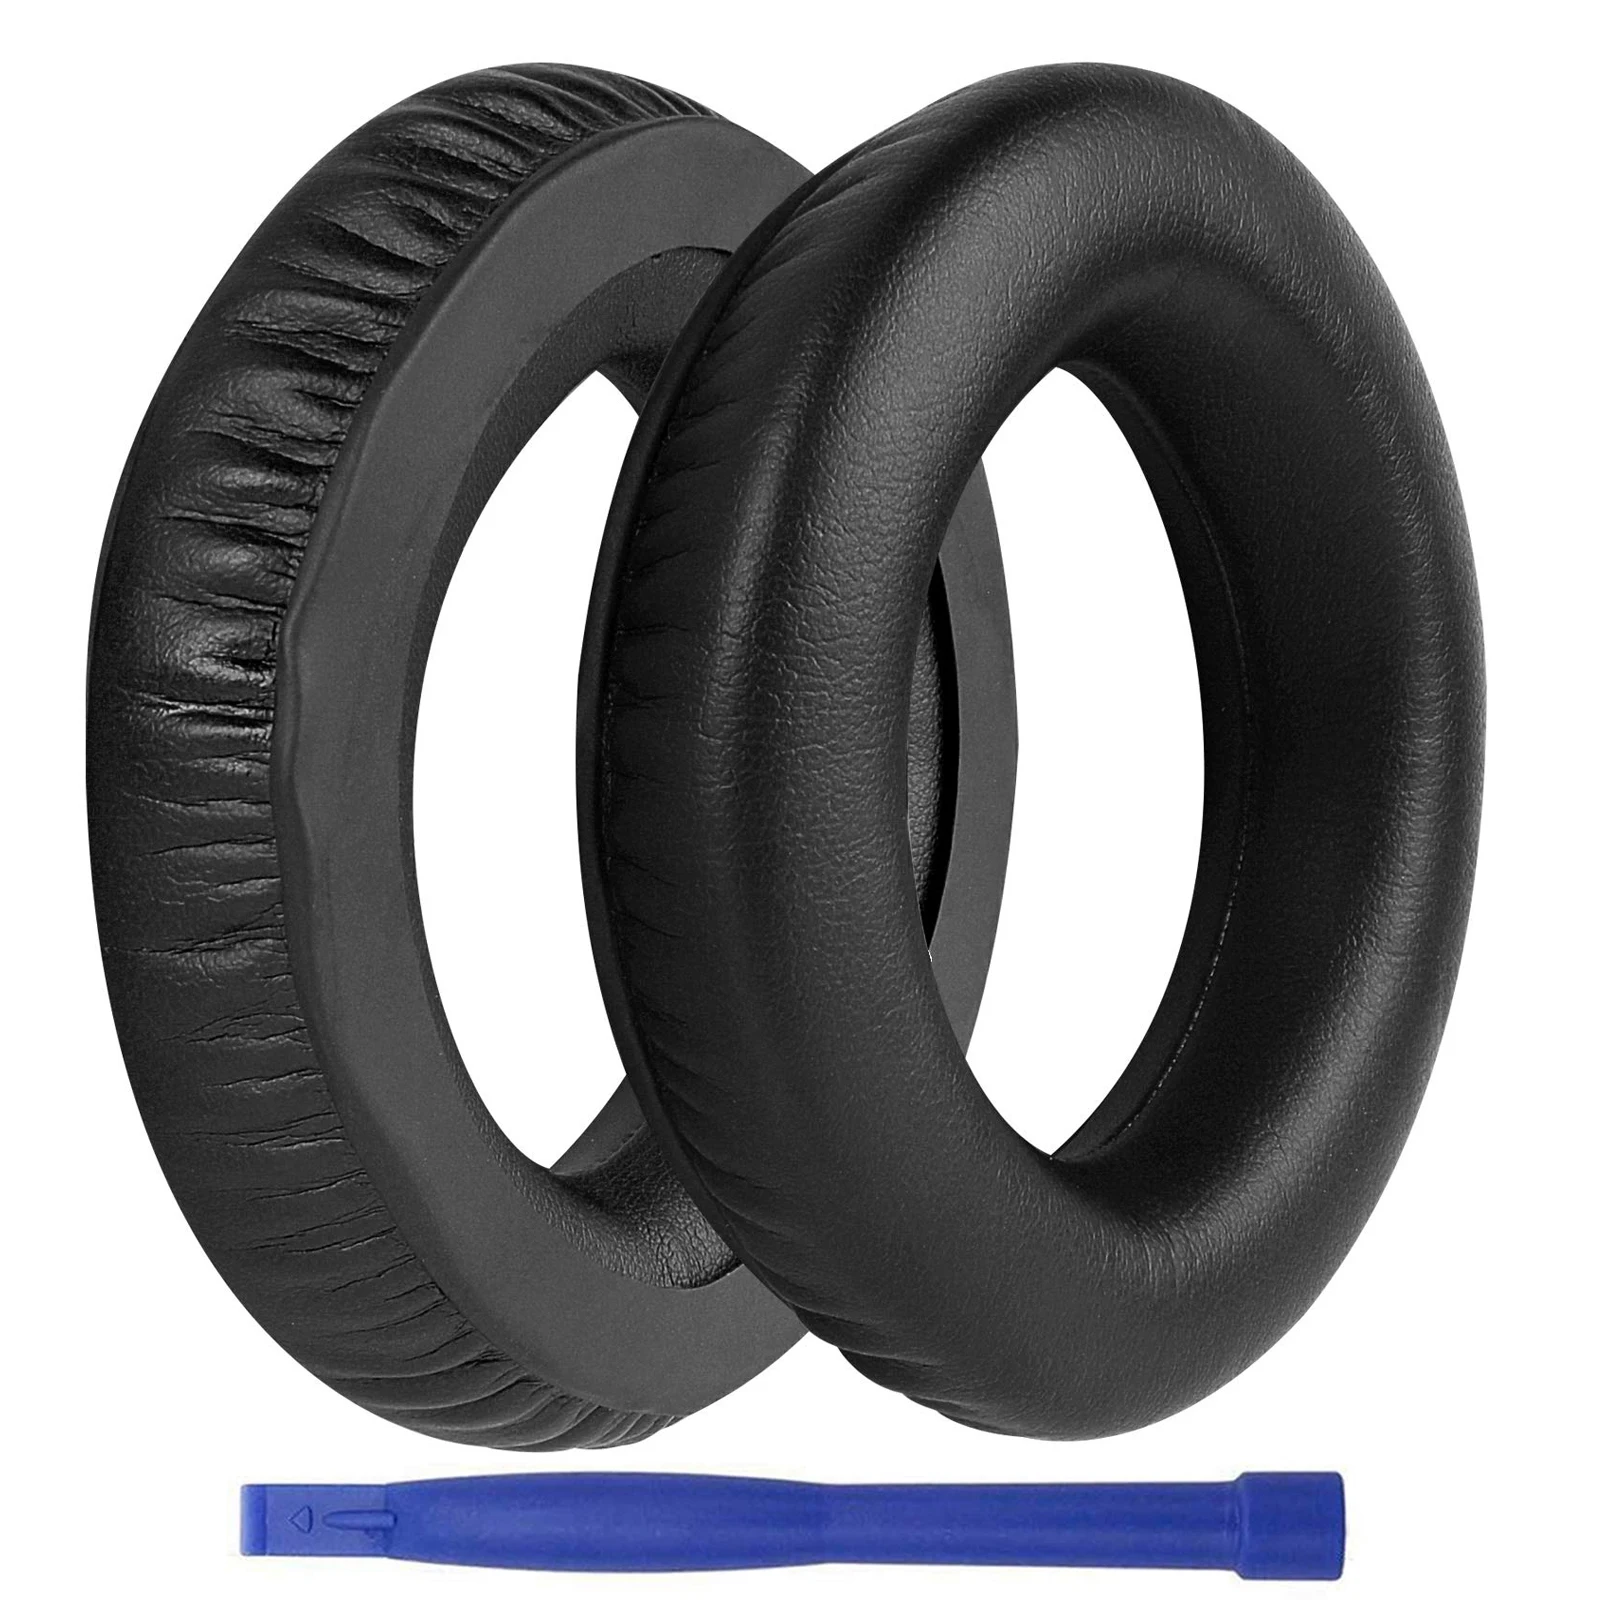 

Replacement Earpads Ear Pad Cushion Cups Cover Muffs Repair Parts for Sennheiser MM550 PX360 PX360-BT PXC360-BT Headphones